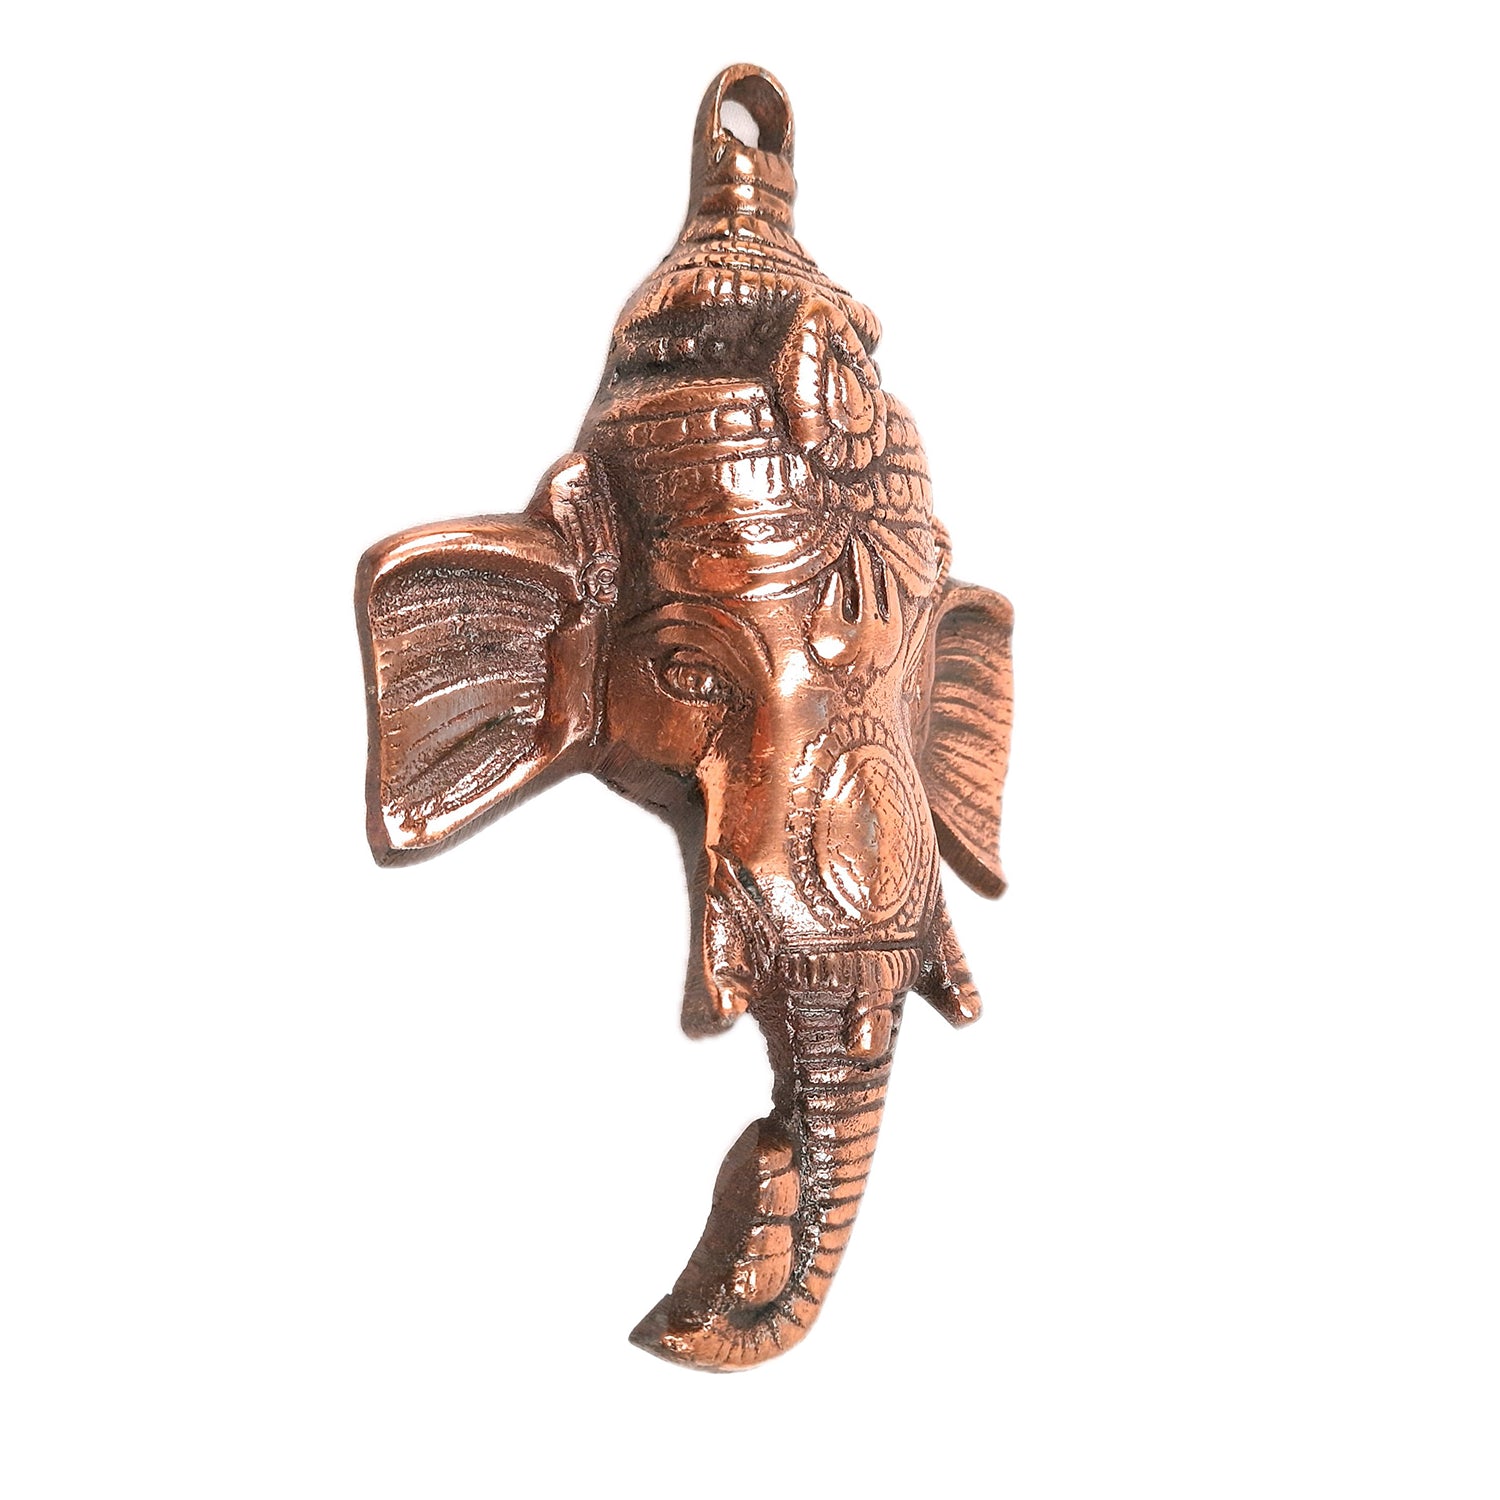 Ganesh Wall Hanging Idol | Lord Ganesha Face Wall Statue Decor - For Puja, Home & Entrance Living Room & Gift - 7 Inch - Apkamart